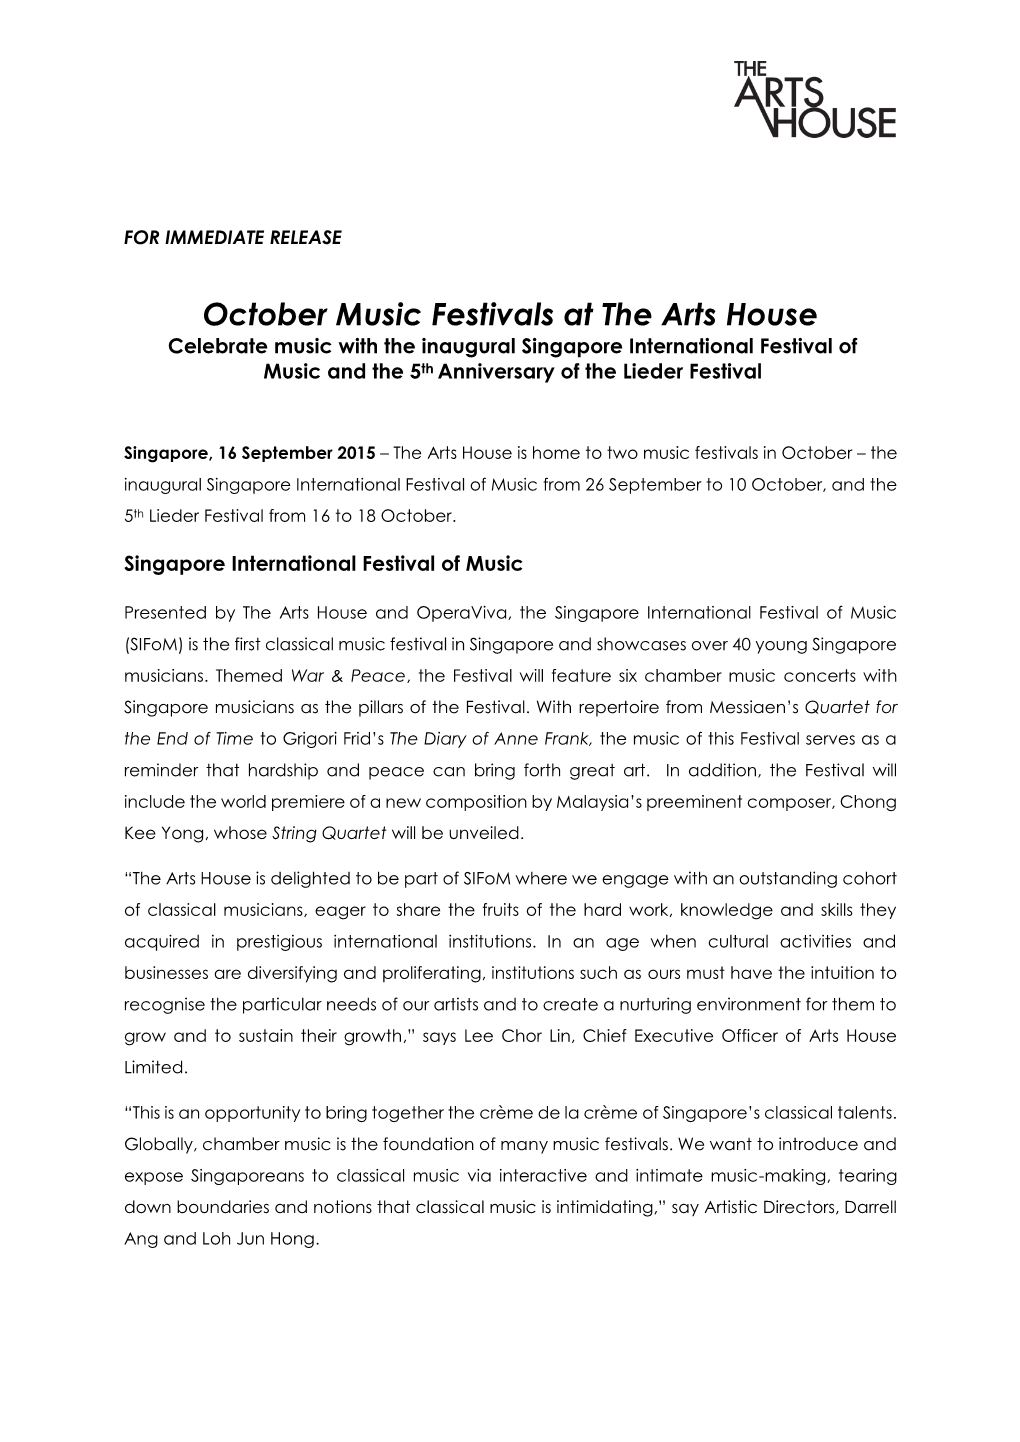 October Music Festivals at the Arts House Celebrate Music with the Inaugural Singapore International Festival of Music and the 5Th Anniversary of the Lieder Festival